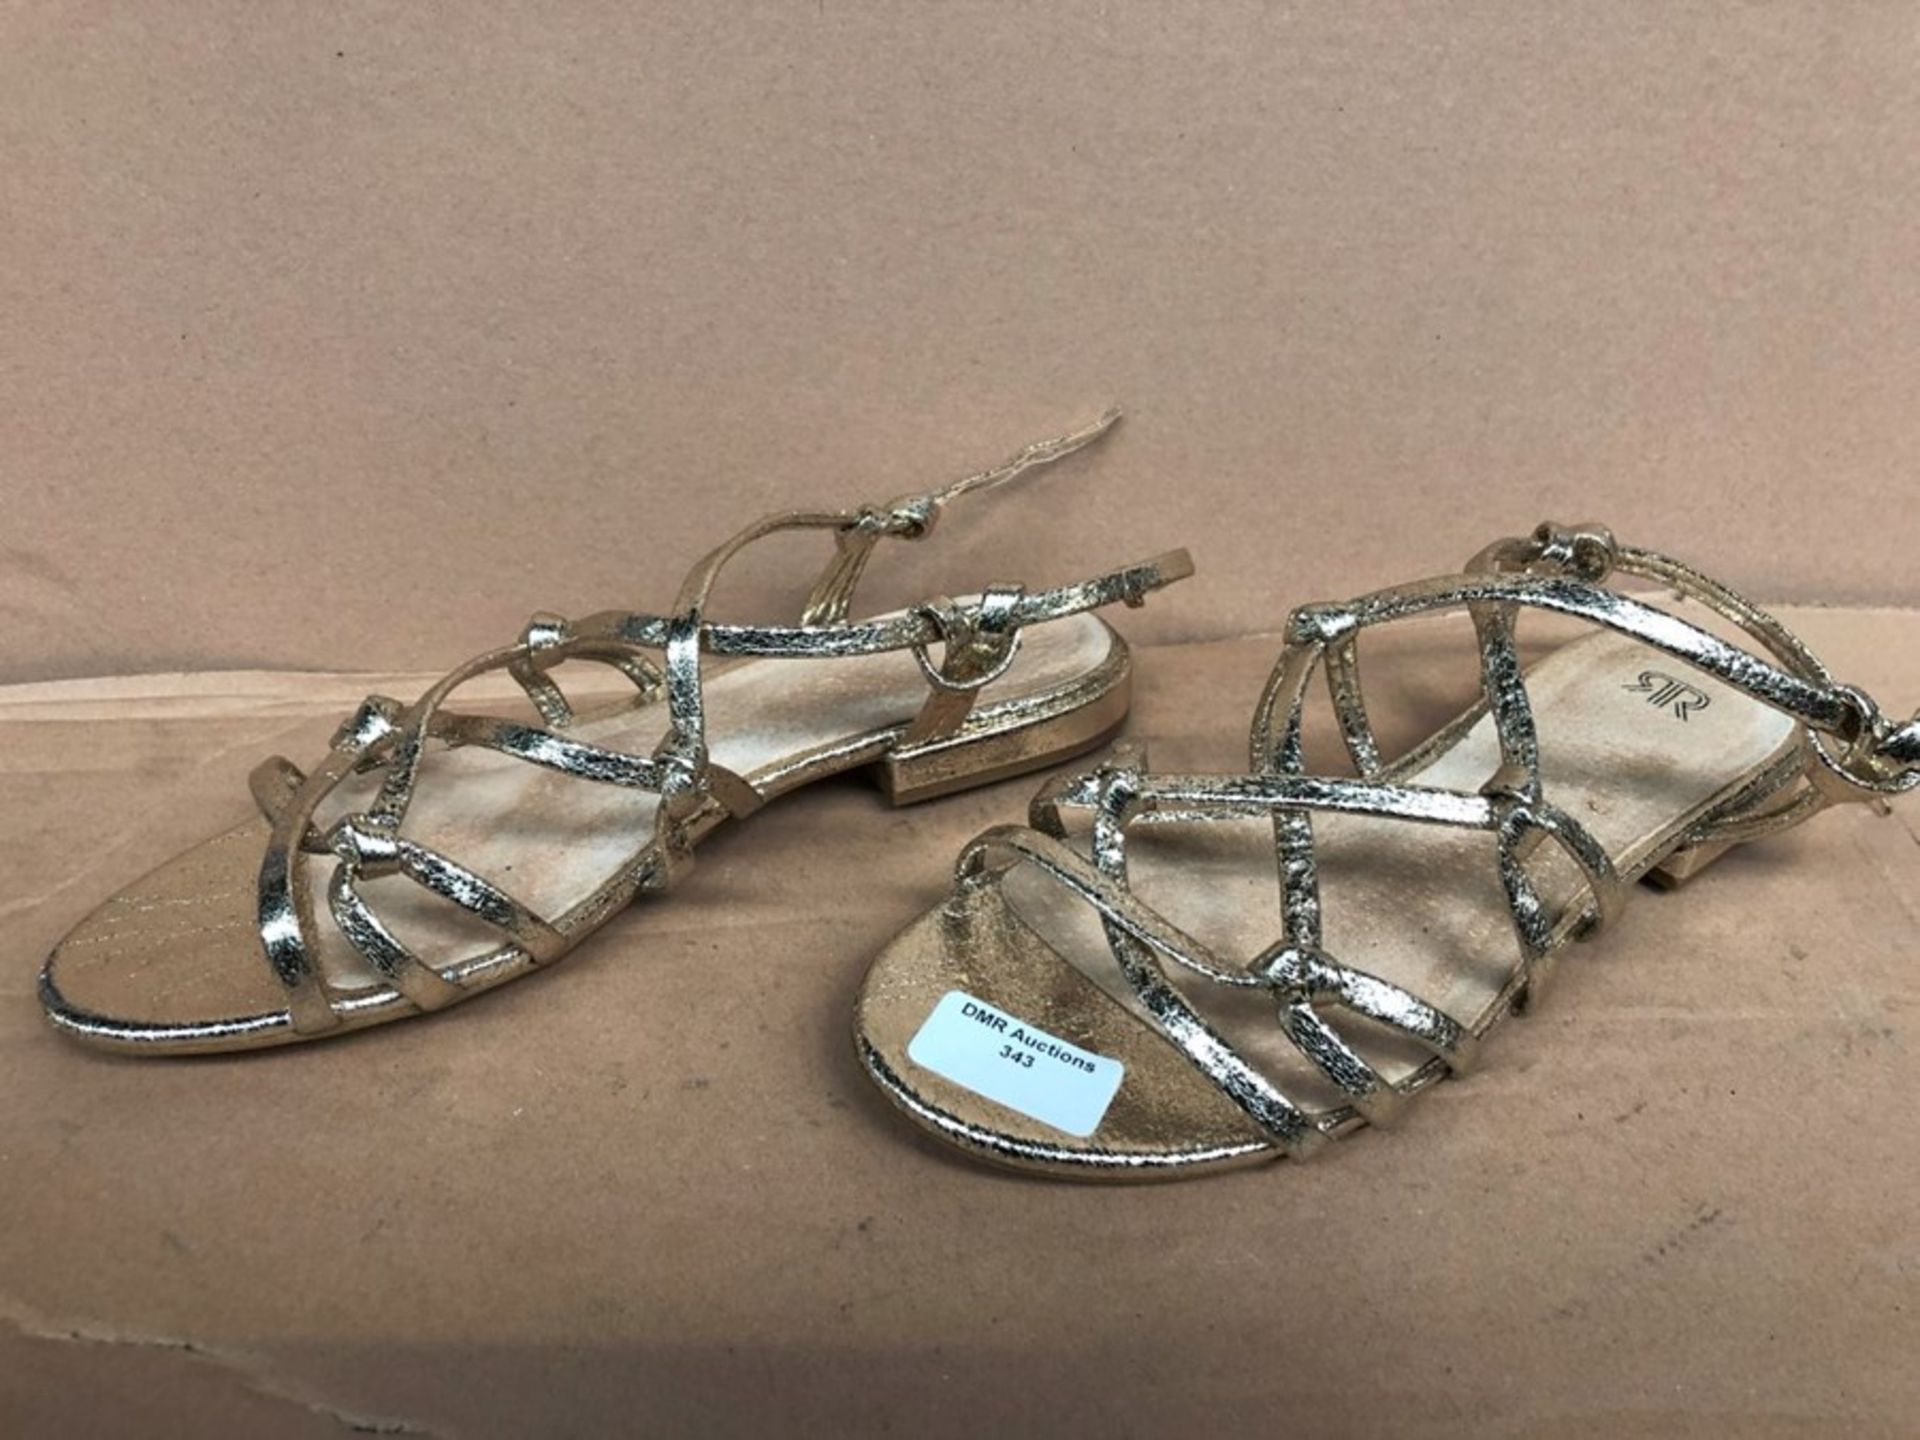 1 PAIR OF FLAT SANDALS WITH THIN STRAP- GOLD / SIZE UK: 6.5 / RRP £40.00